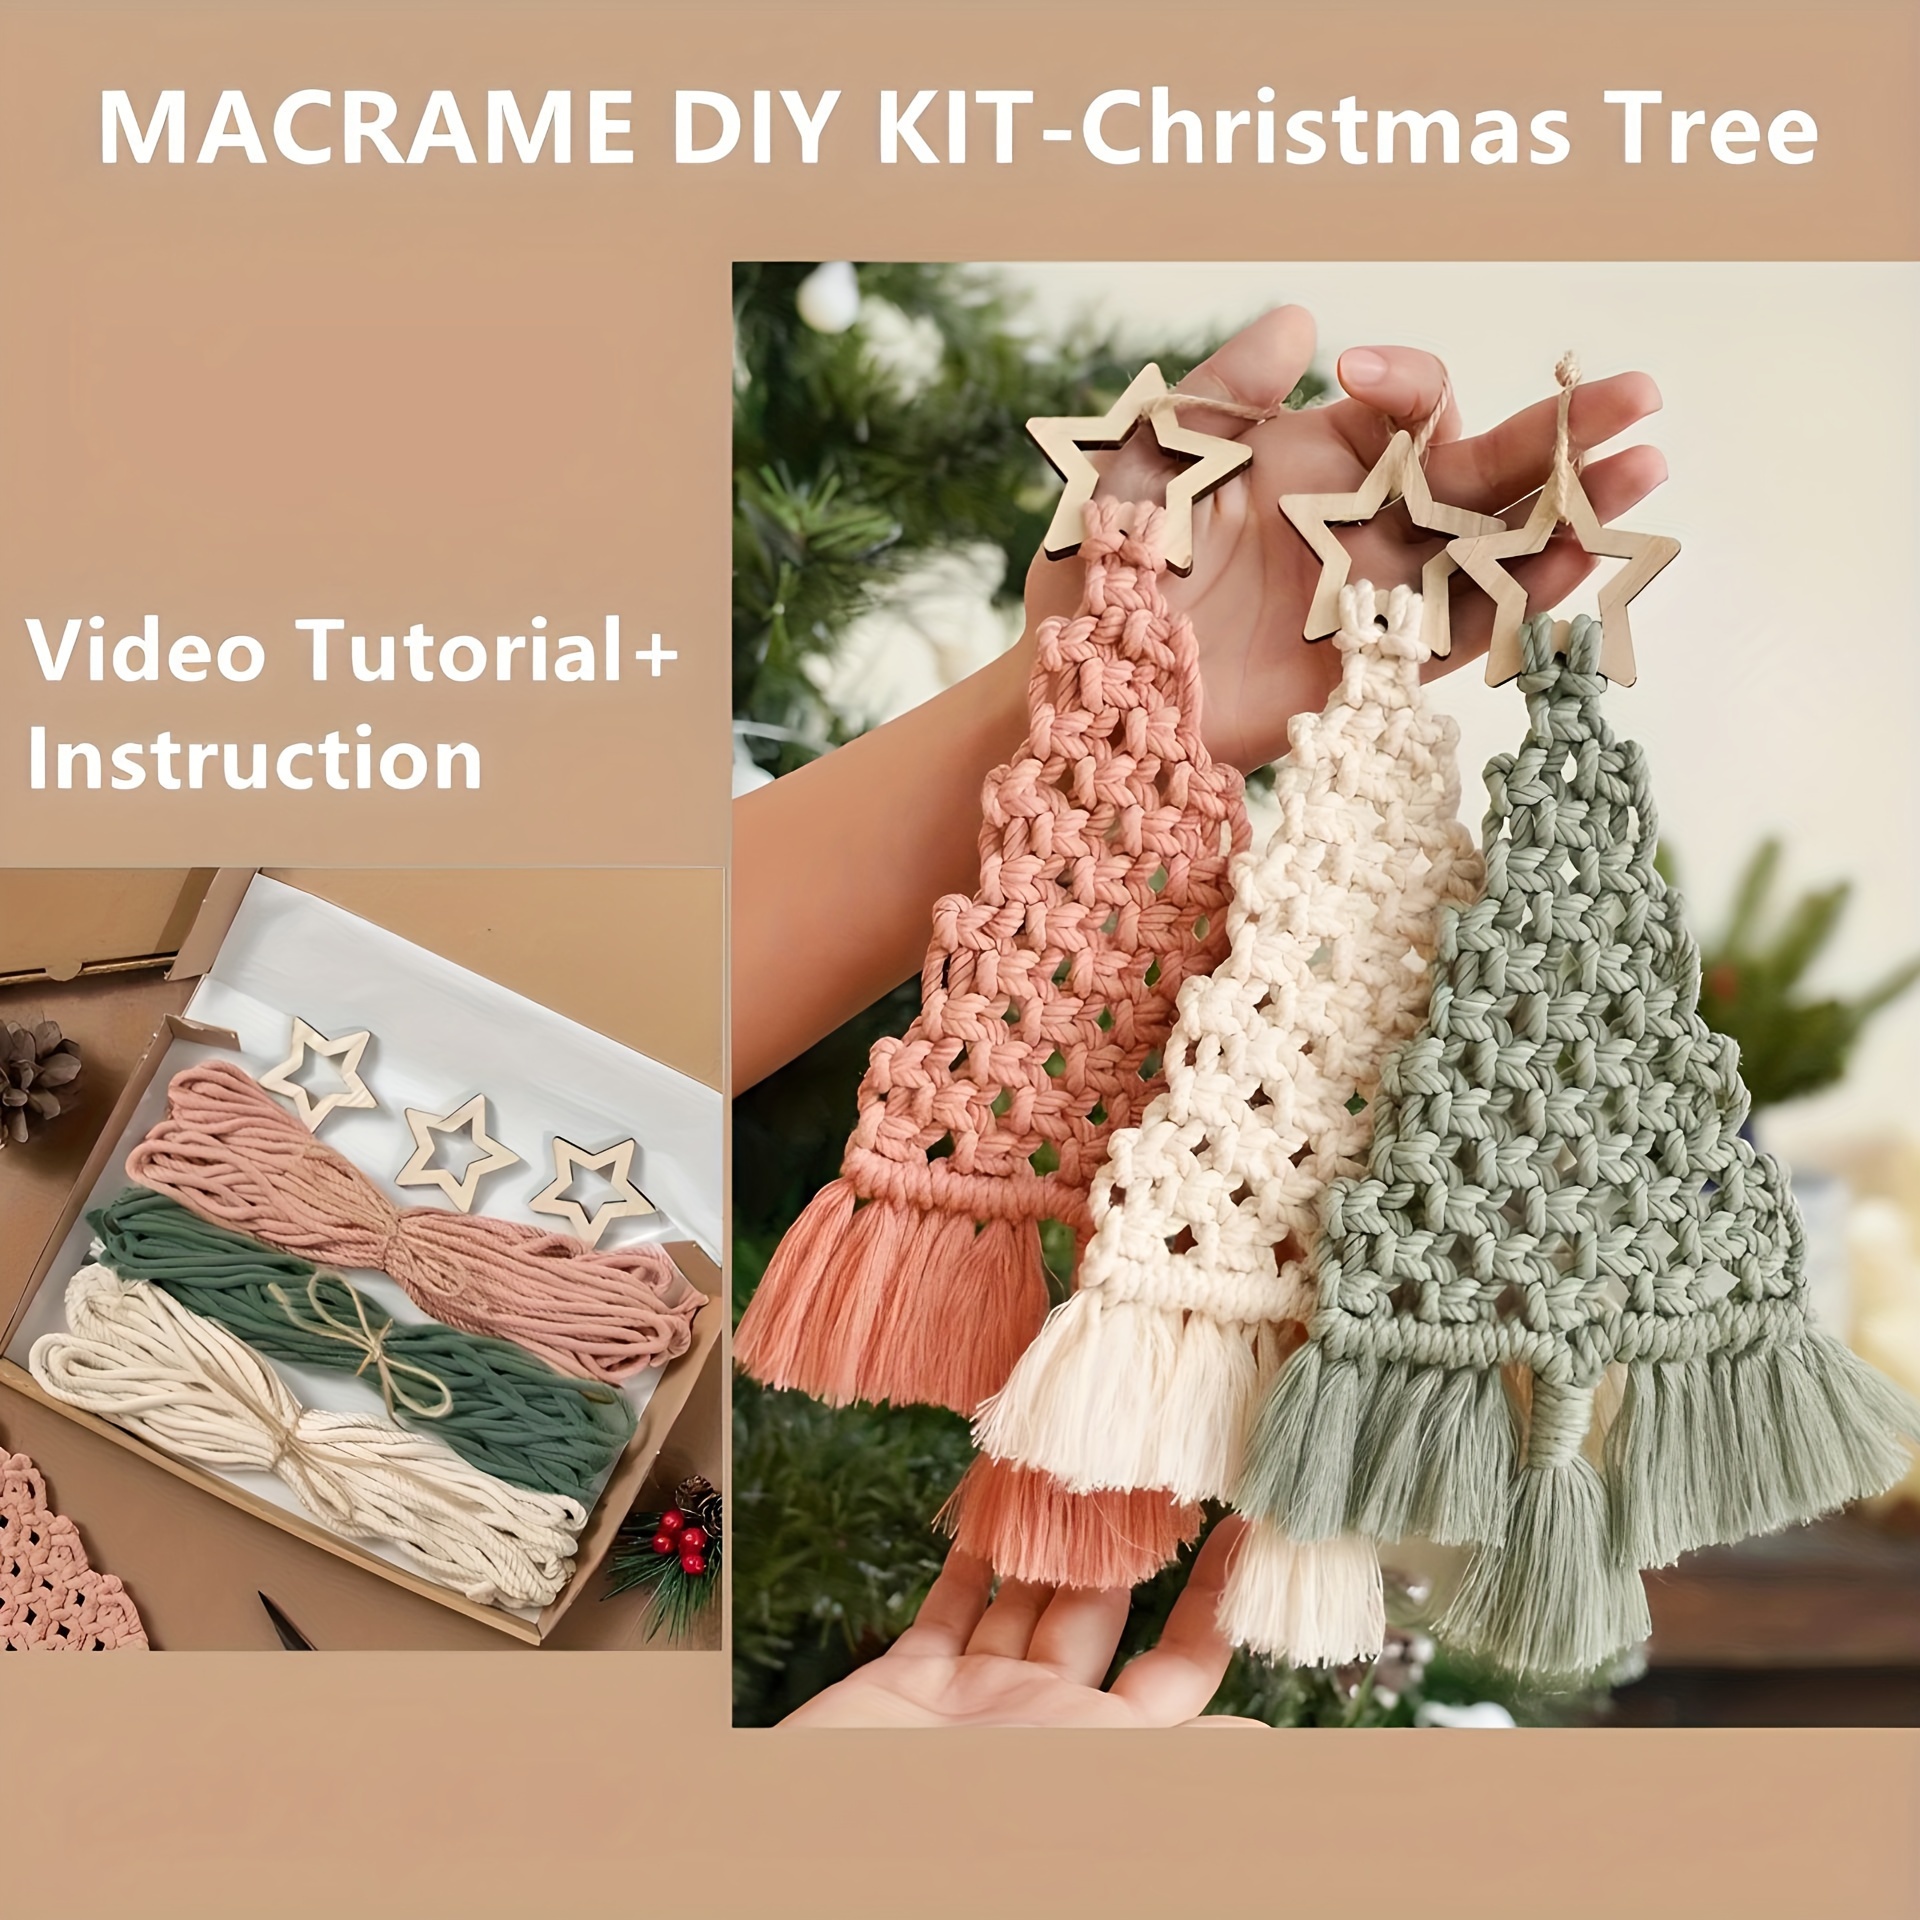 

3pcs/set Macrame Christmas Tree Diy Kit, Christmas Gift Knitting Craft Kit Is Suitable For Beginners Perfect Gift For Friends And Family